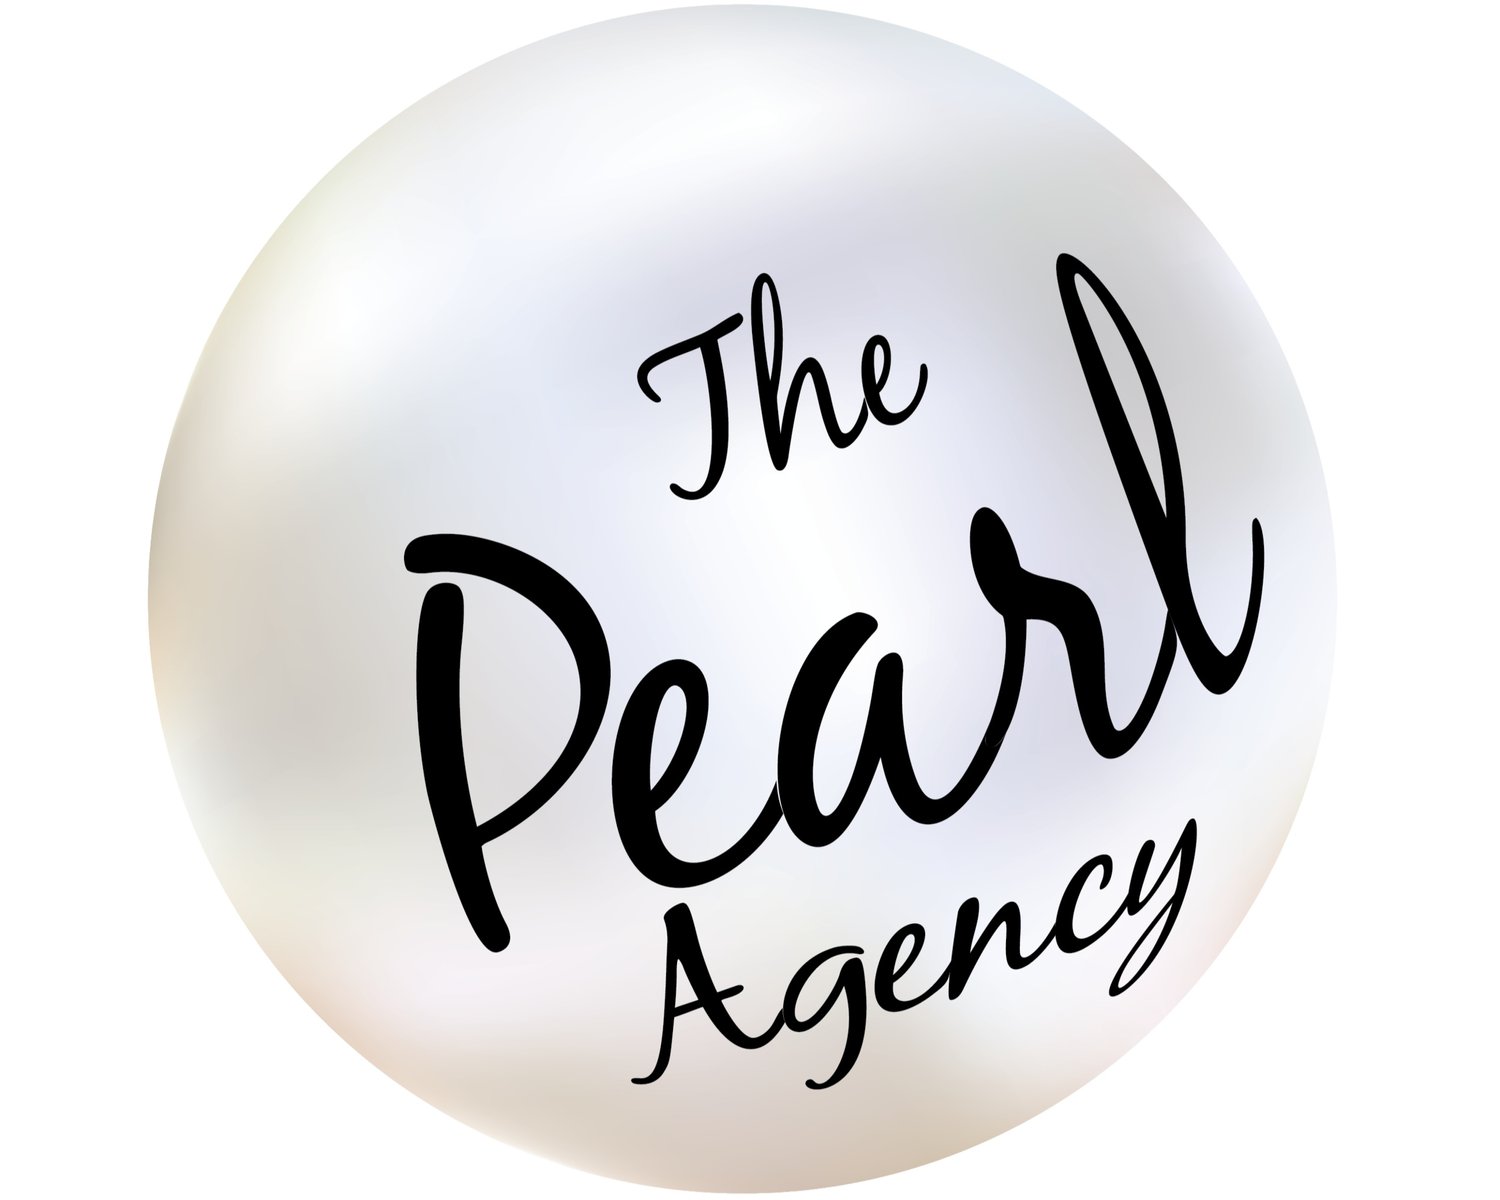 The Pearl Agency